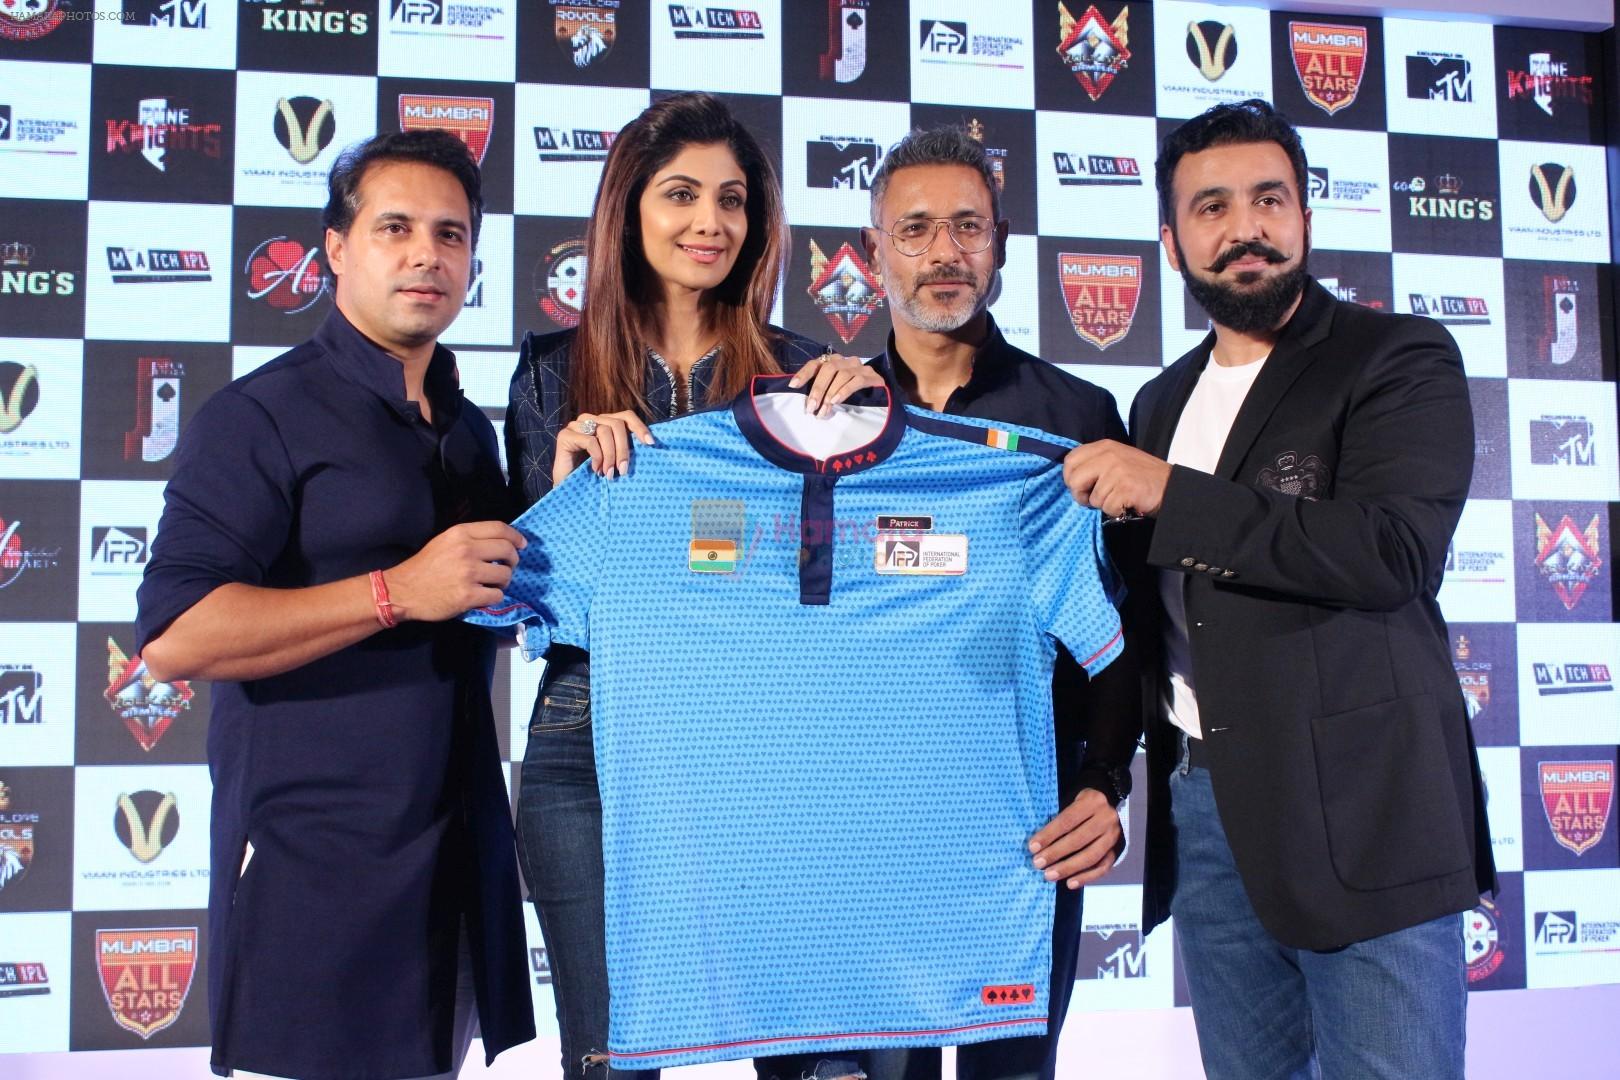 Shilpa Shetty, Raj Kundra at Official Announcement Of The Indian Poker League on 8th Aug 2017